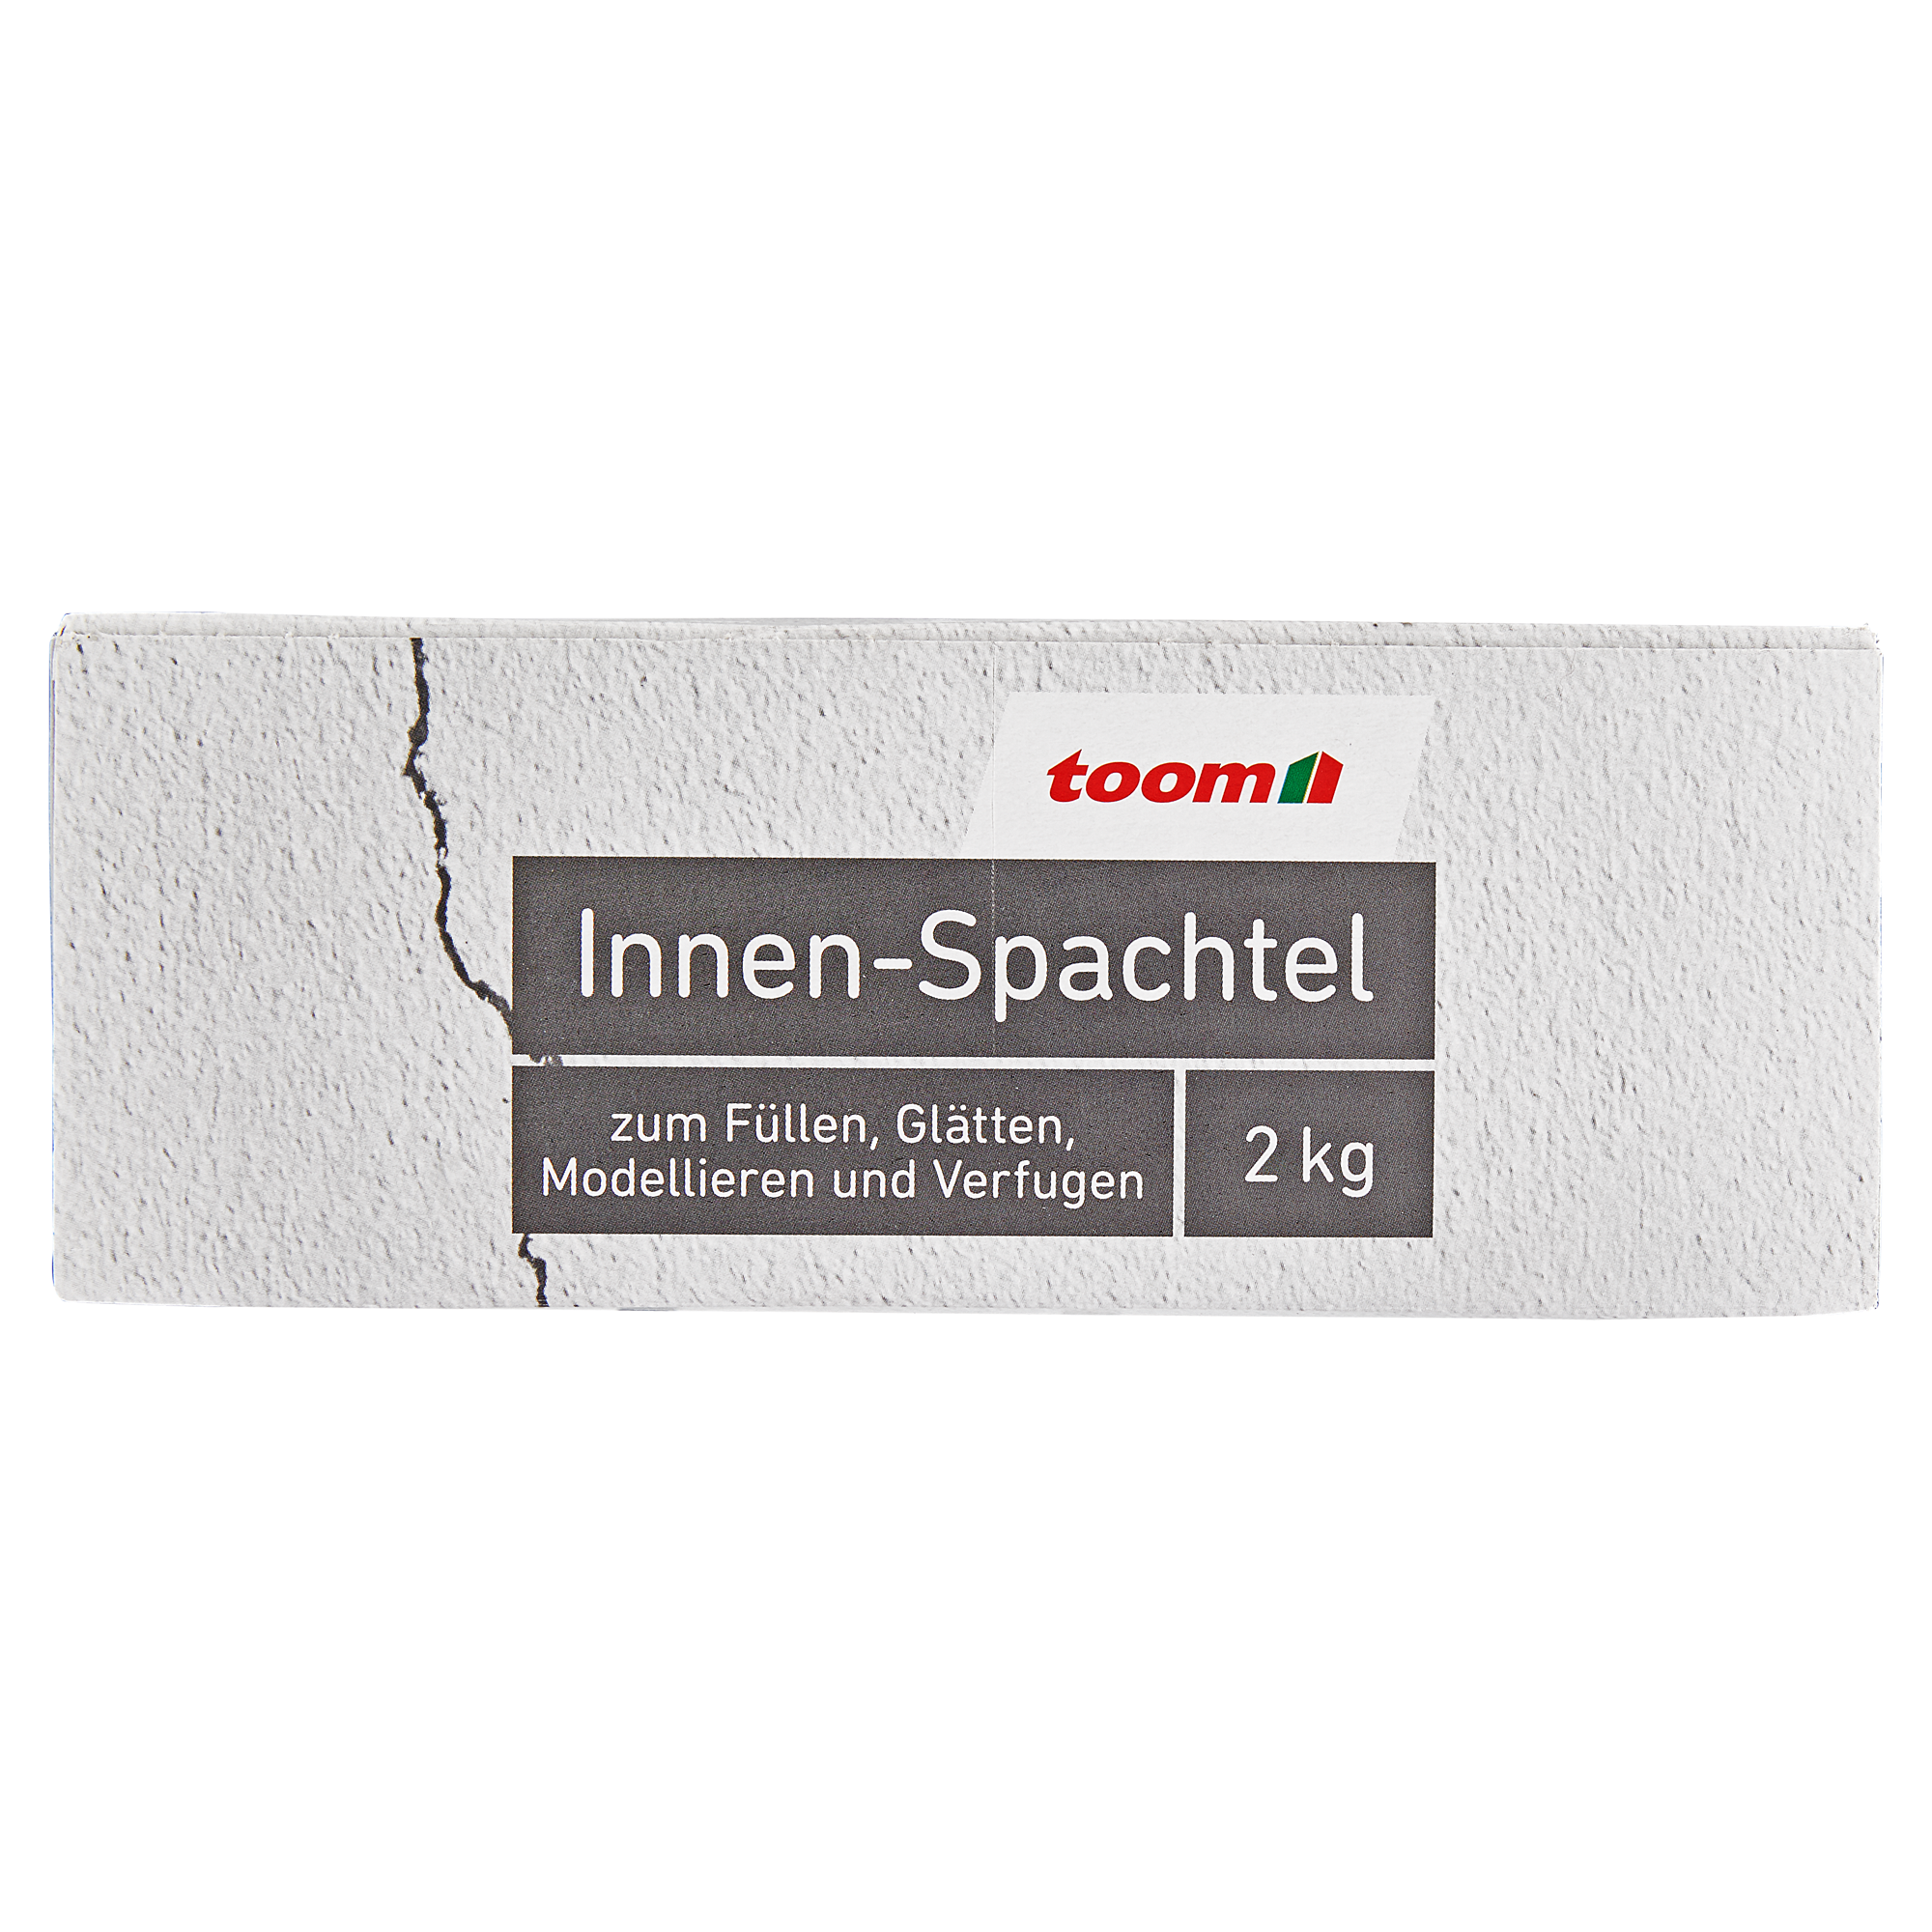 Innenspachtel 2 kg + product picture